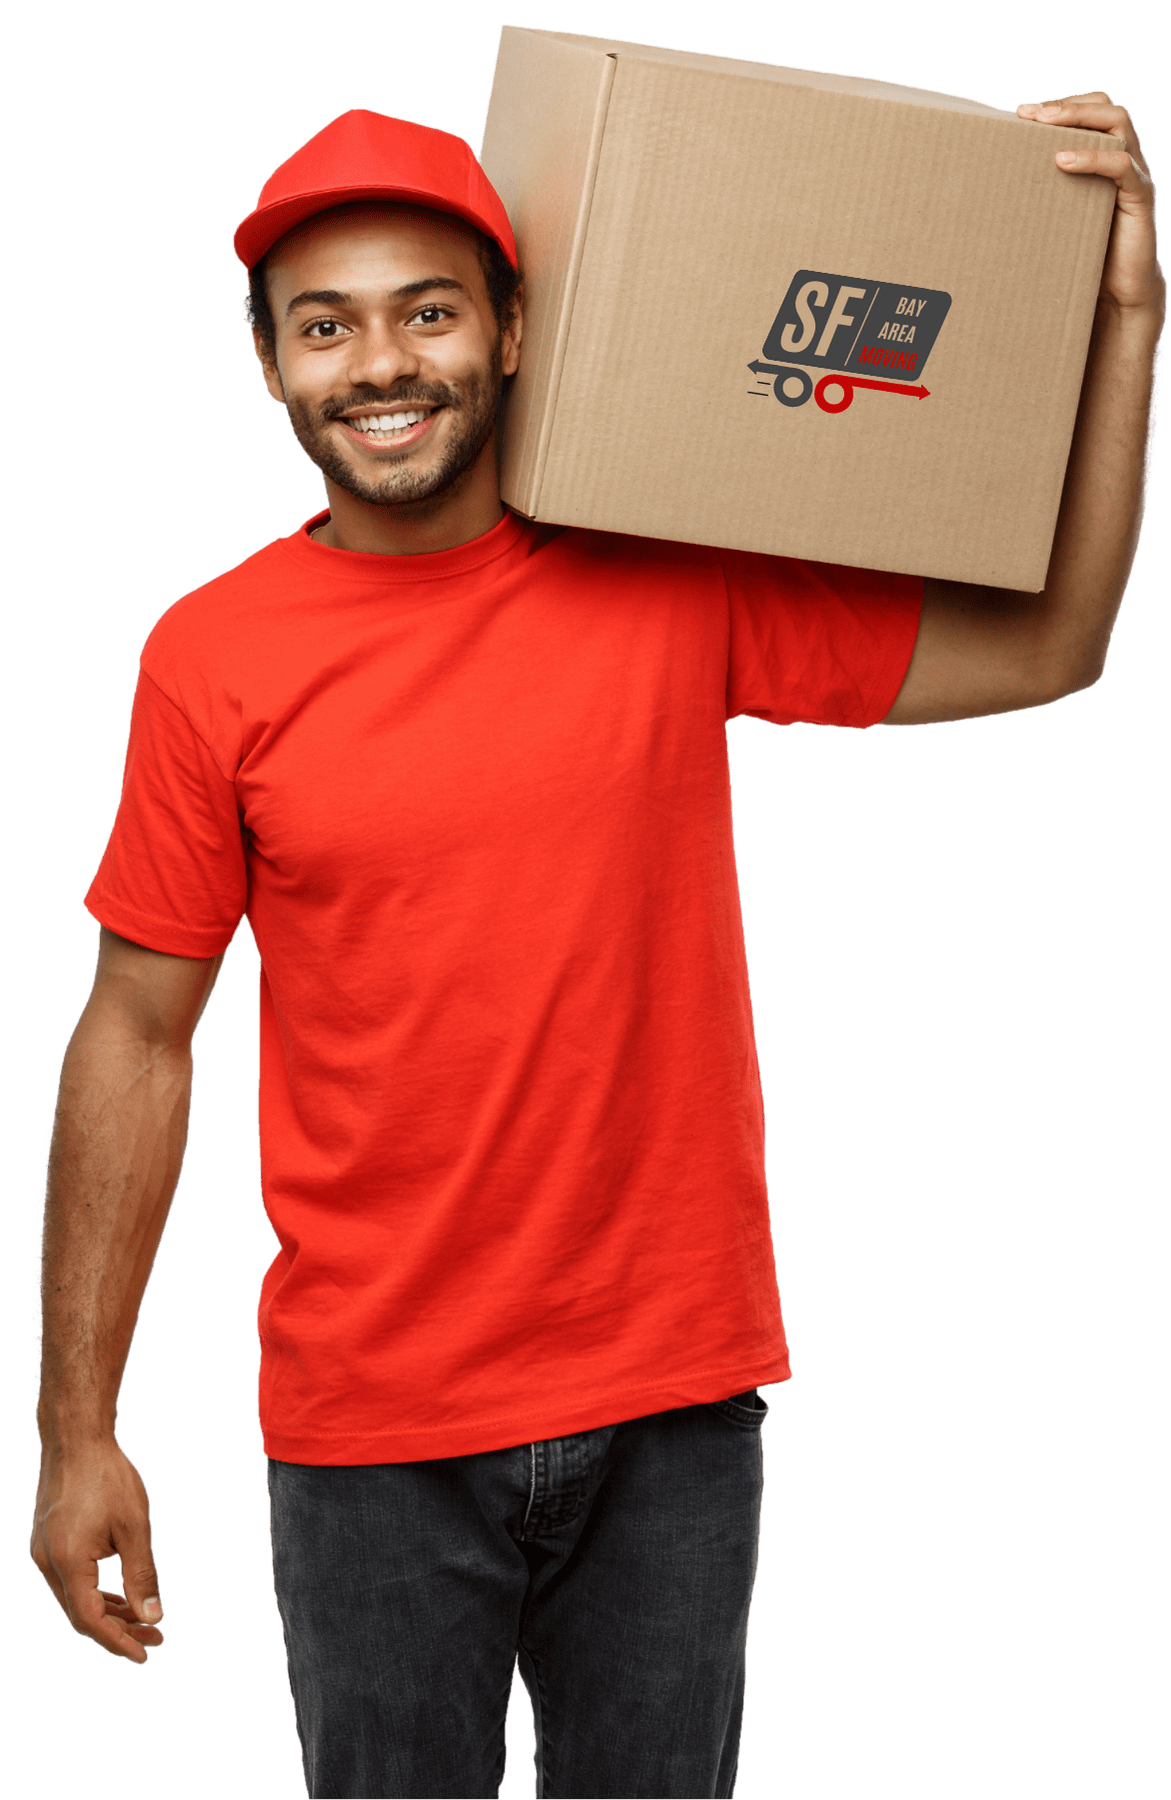 best movers bay area